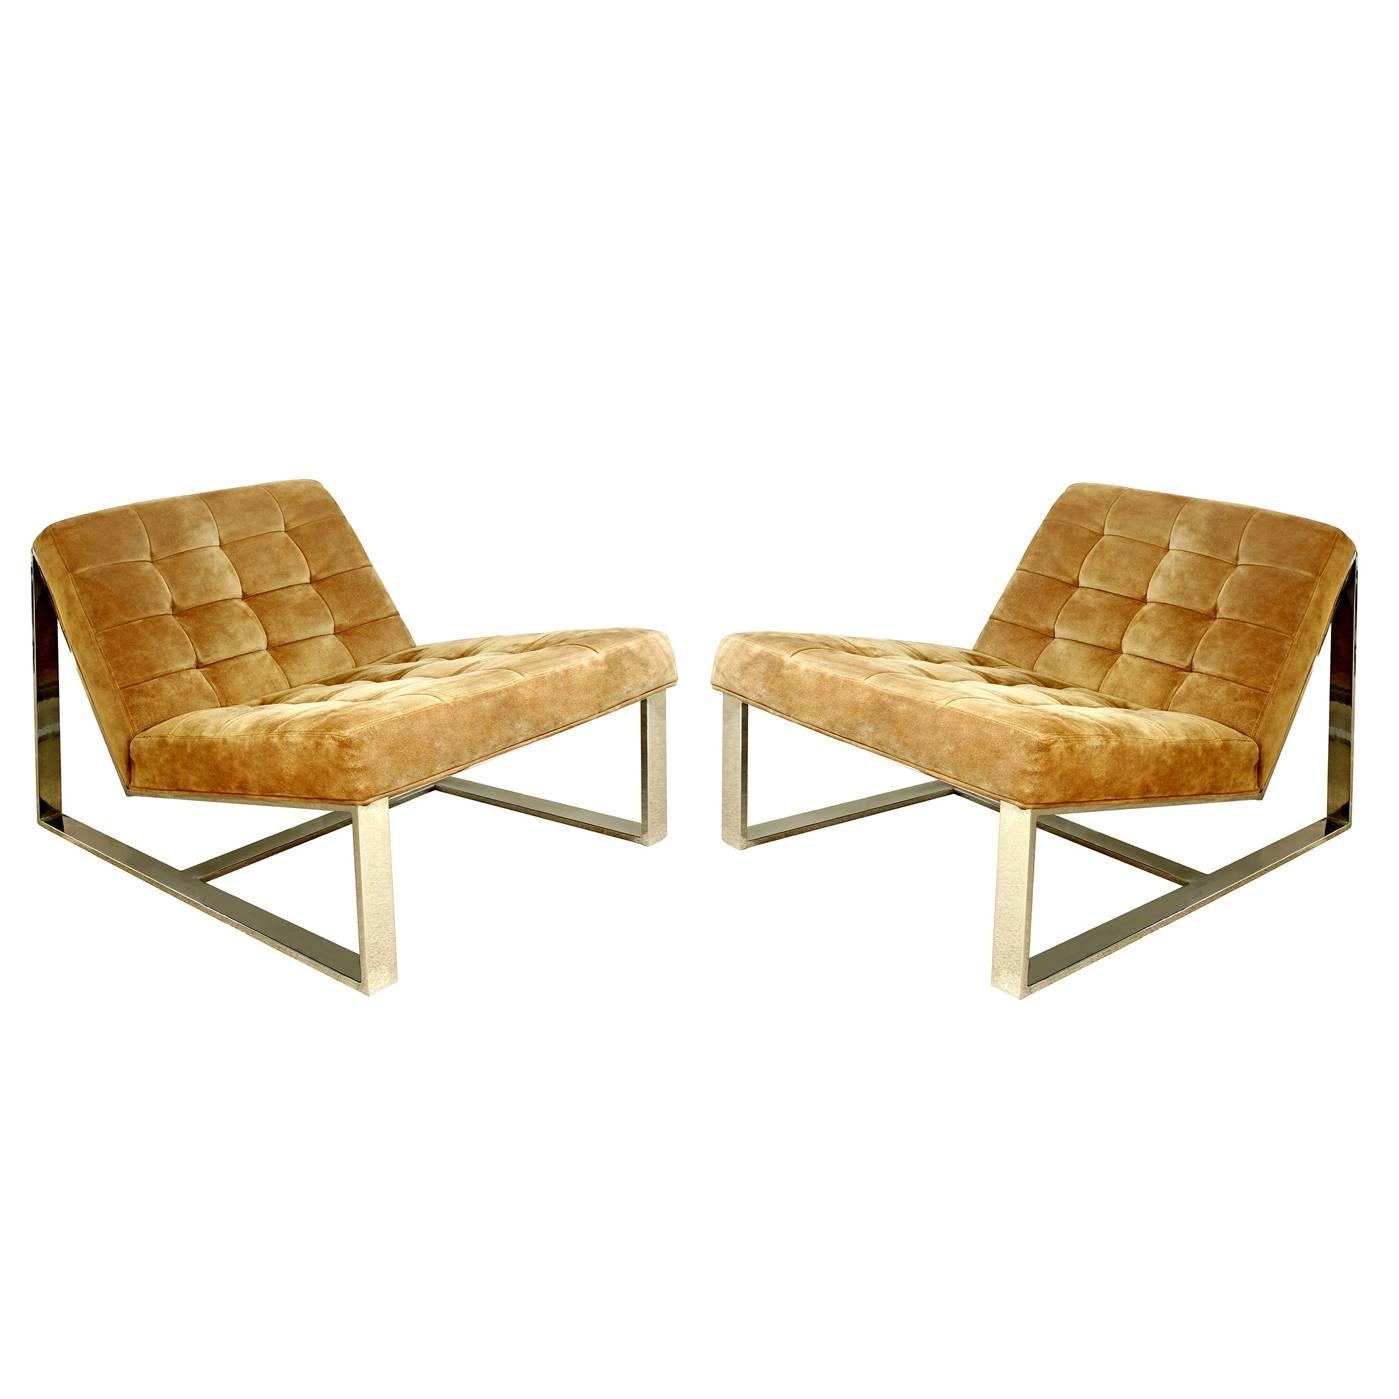 Pair of Super Chic Slipper Chairs by Milo Baughman